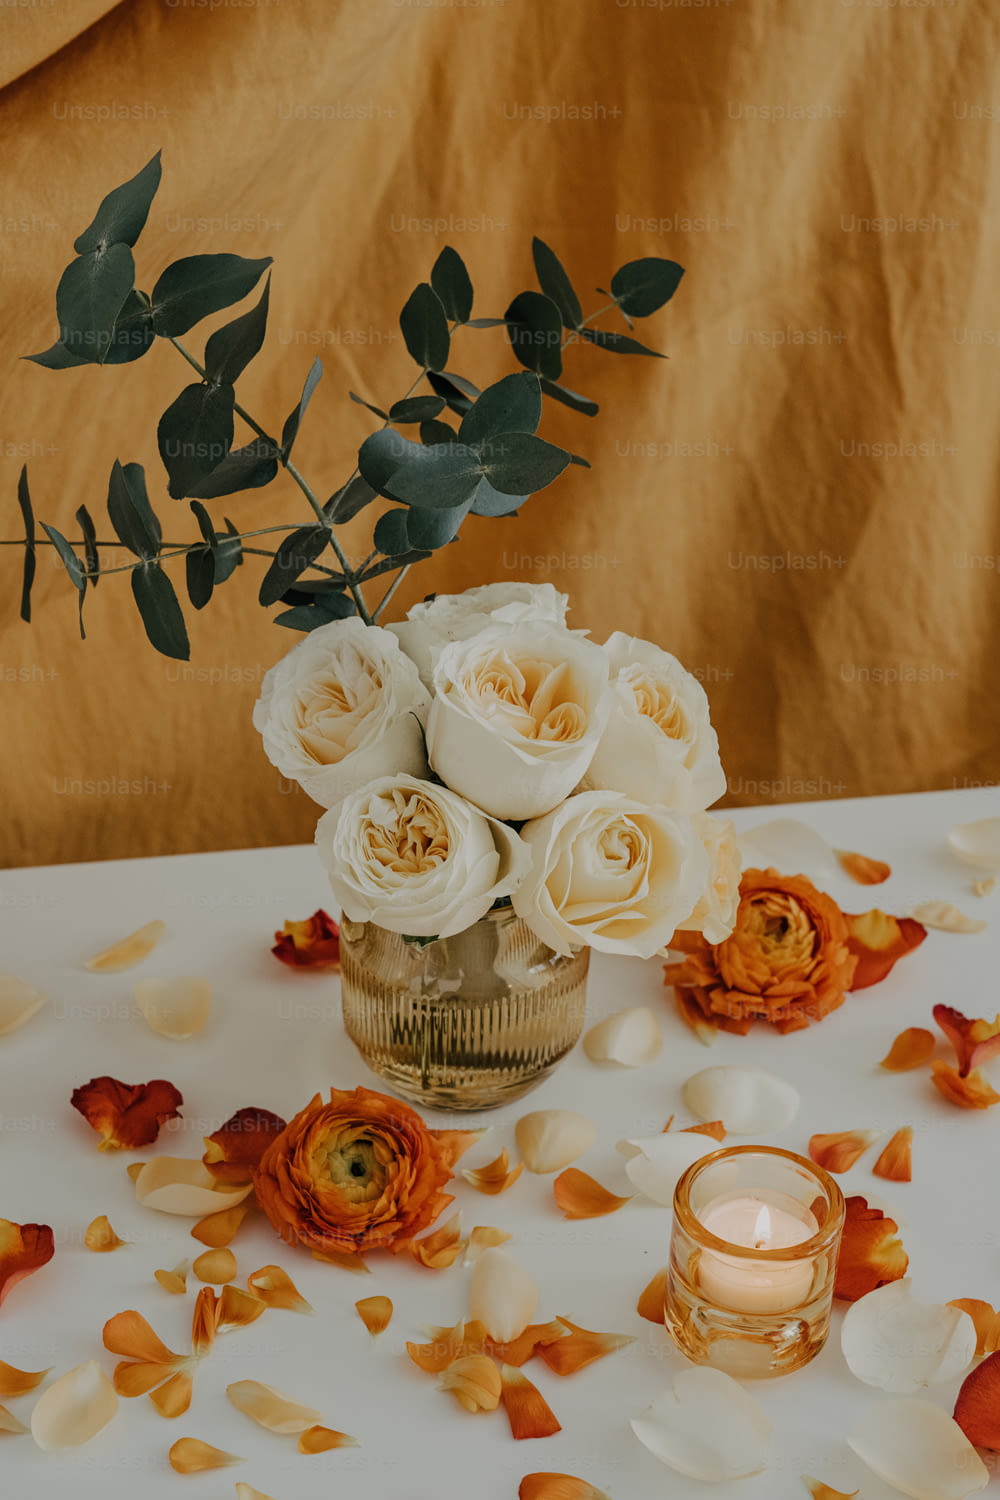 a vase filled with white roses on top of a table